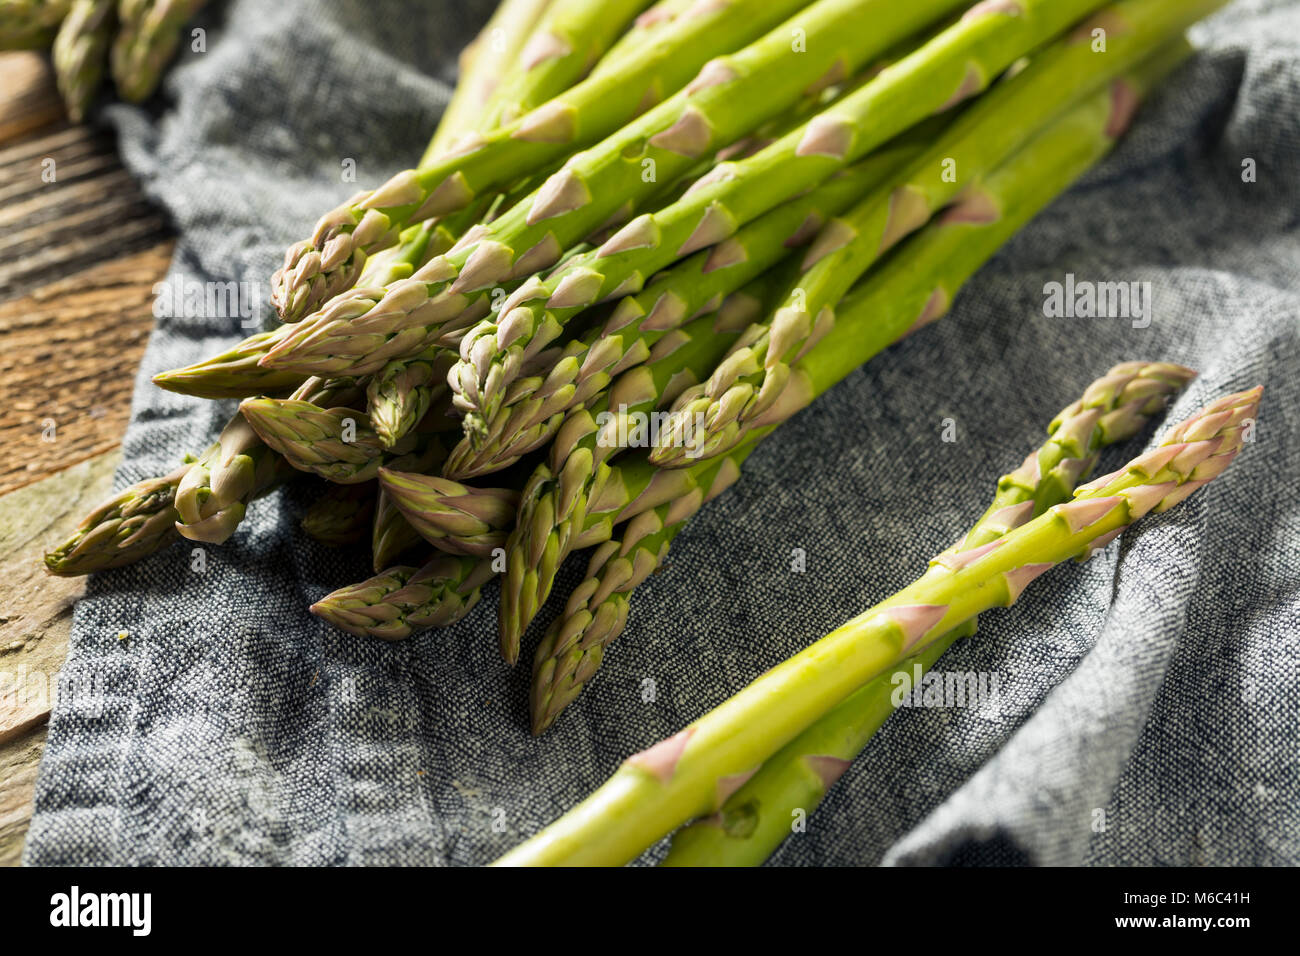 Healthy Organic Green Asparagus Stalks Ready to Cook Stock Photo